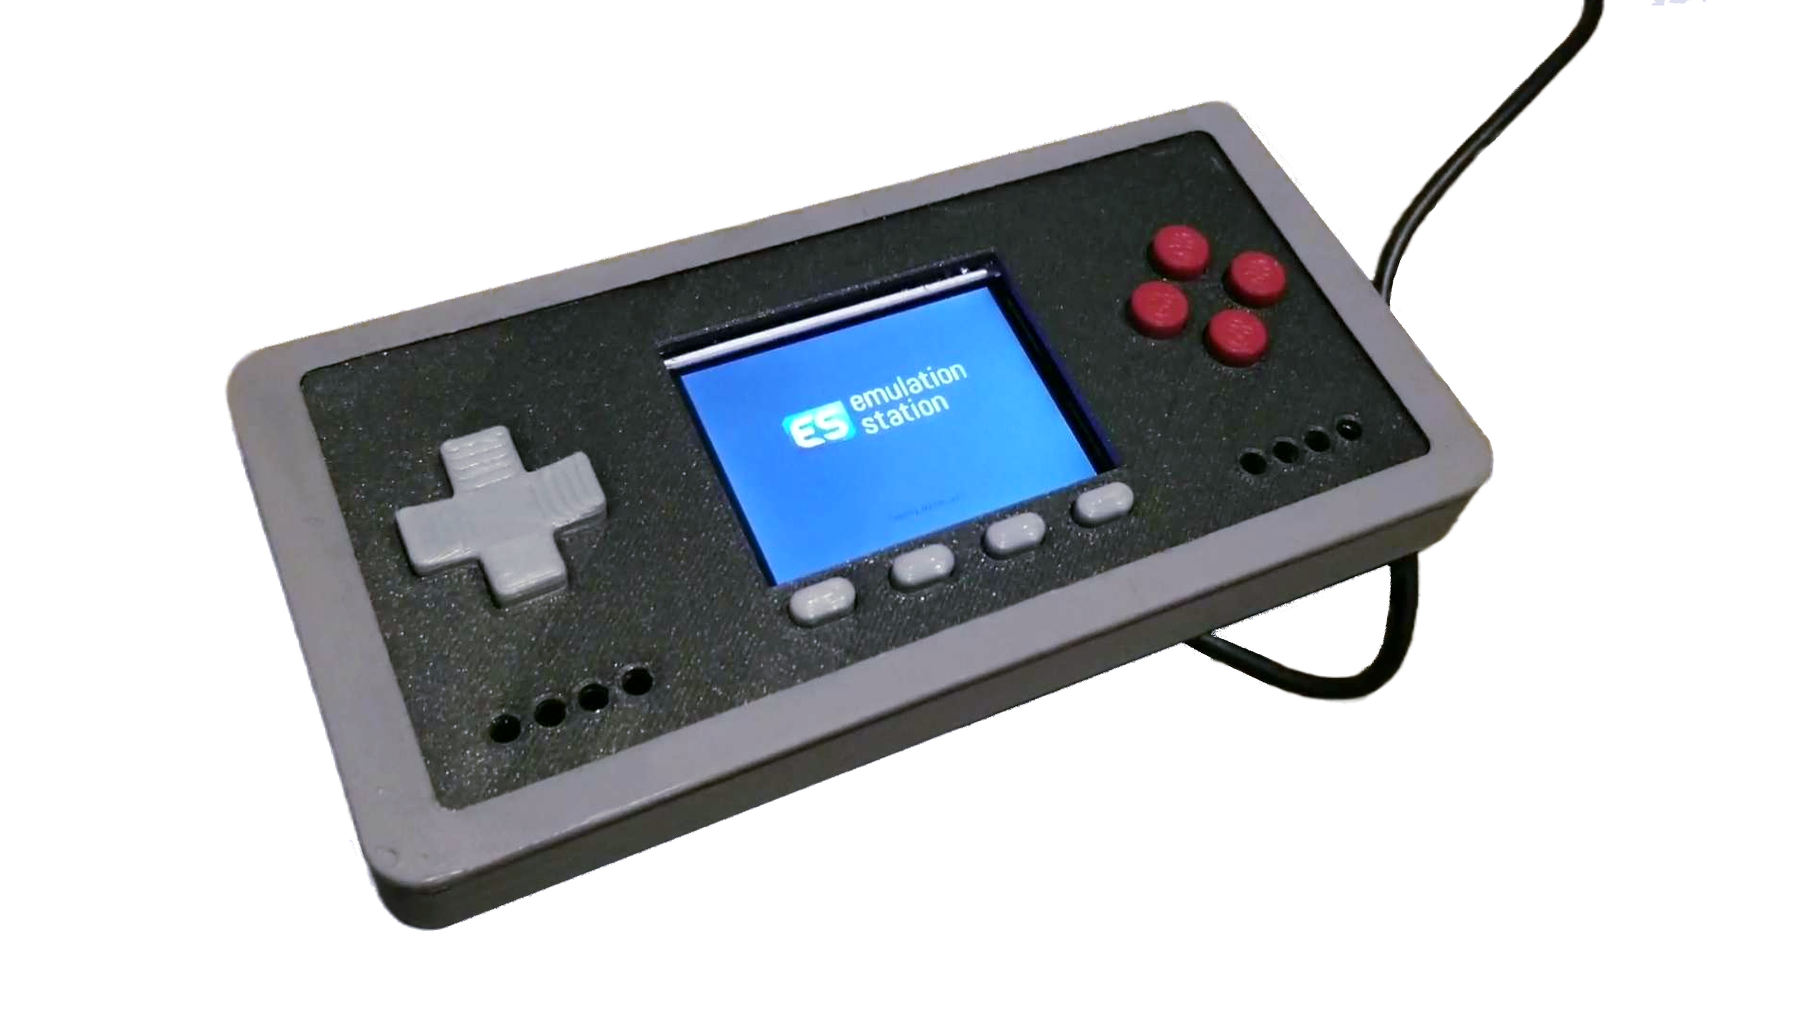 A 3d printed video game emulator that looks like an NES controller.